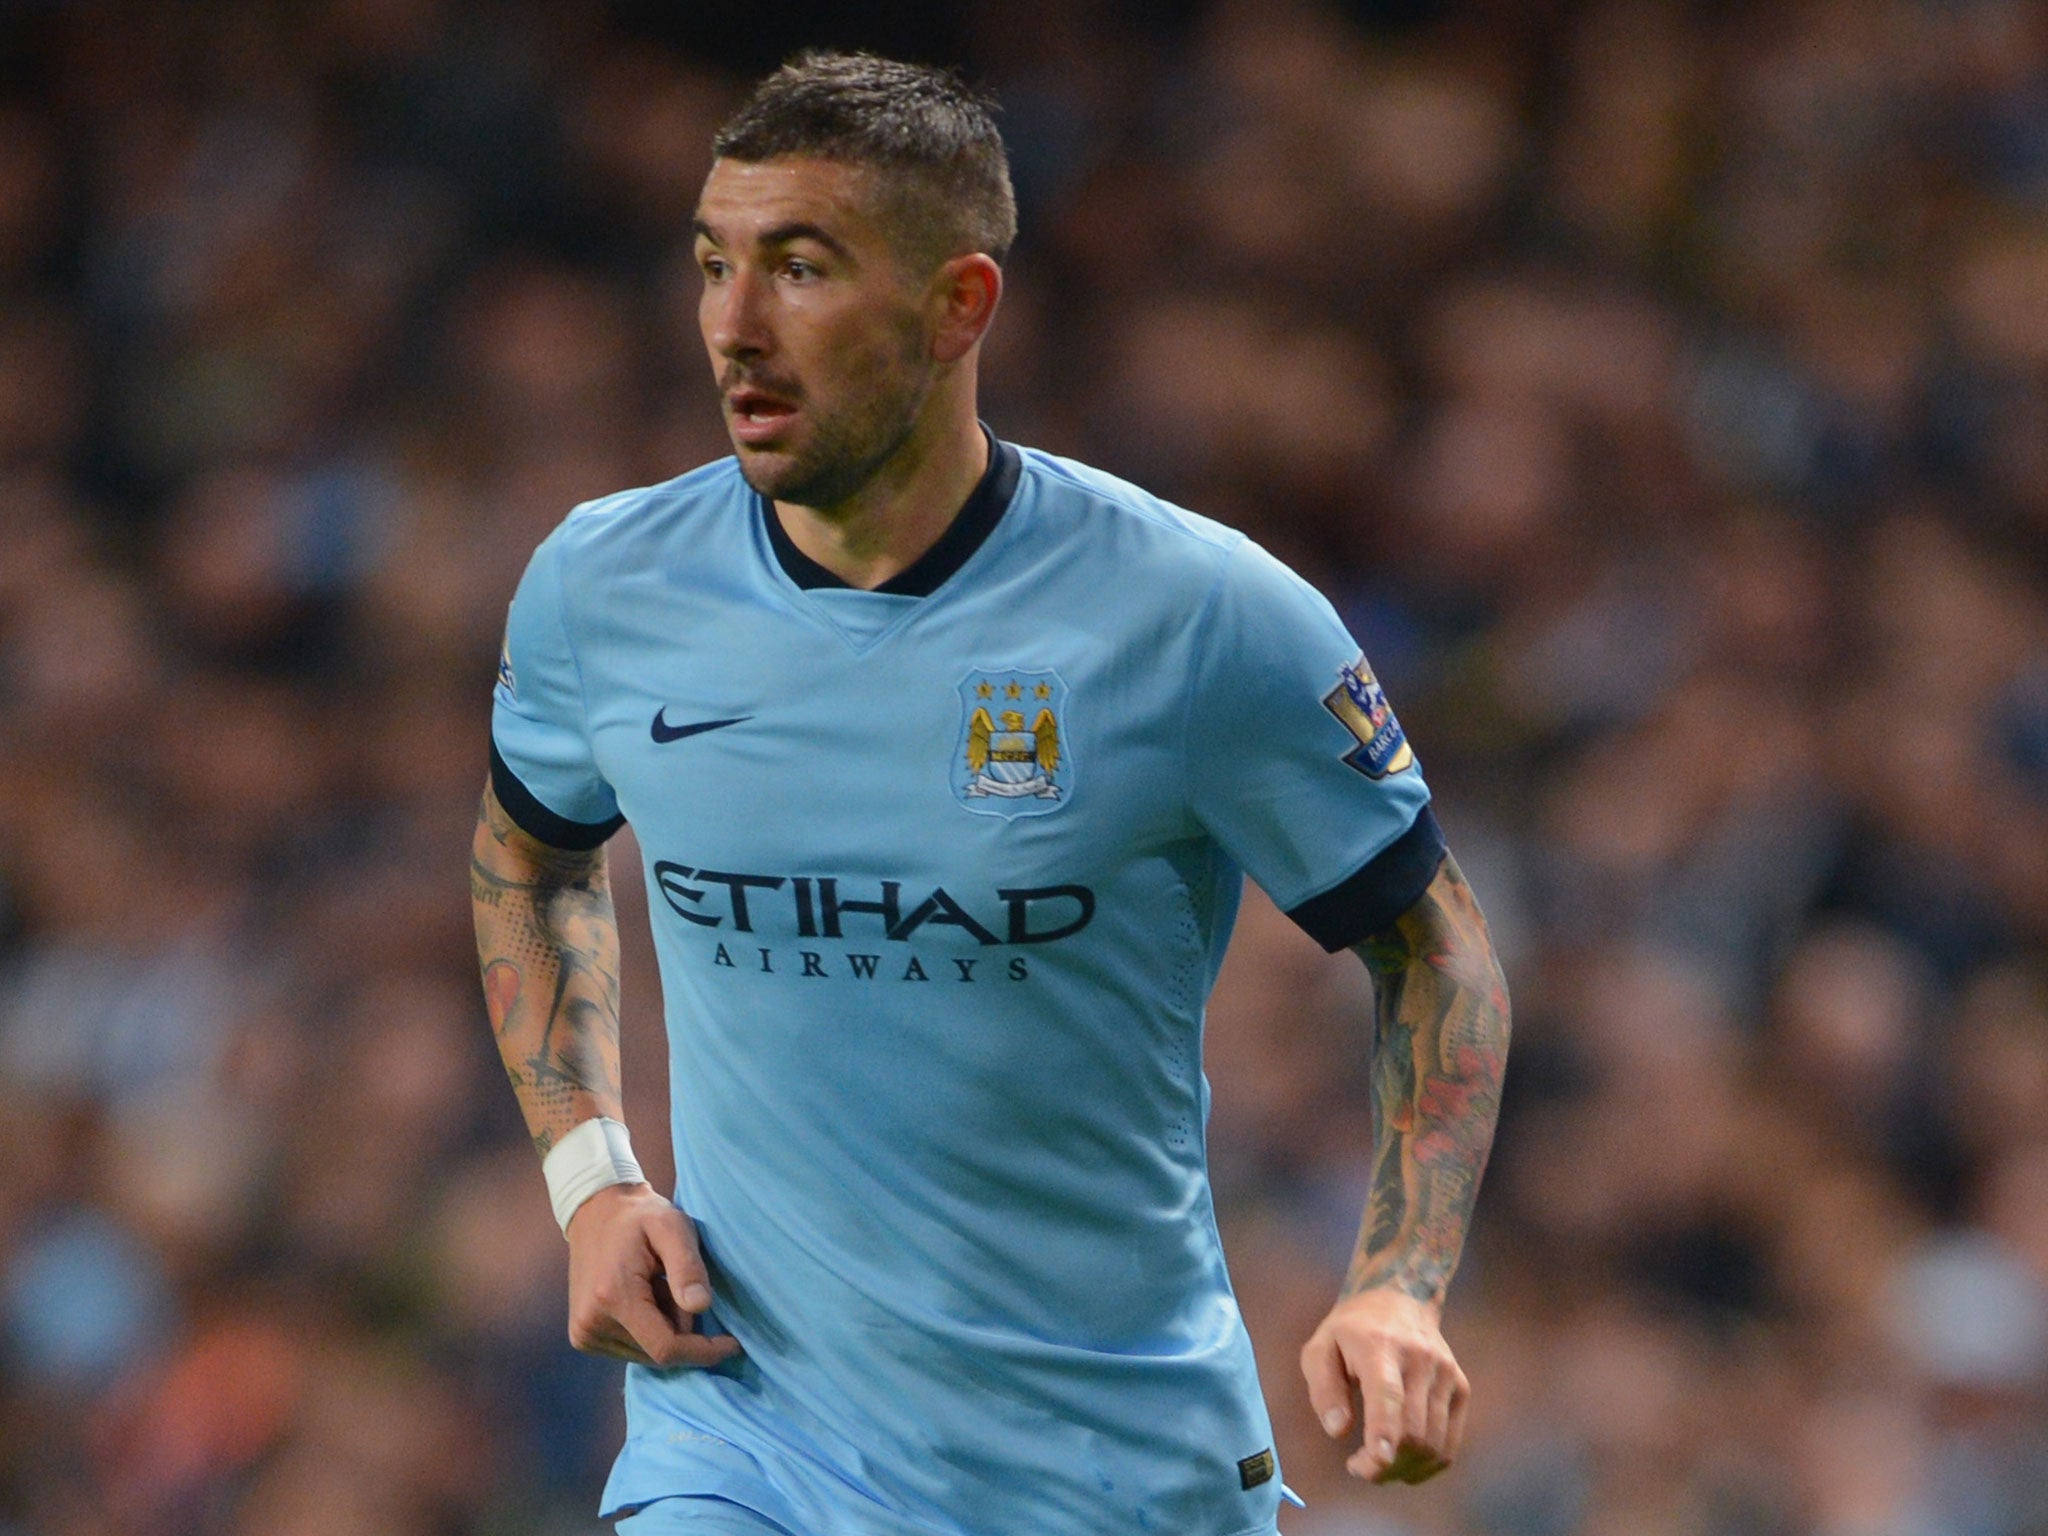 Aleksandar Kolarov has been ruled out for up to a month with a calf injury